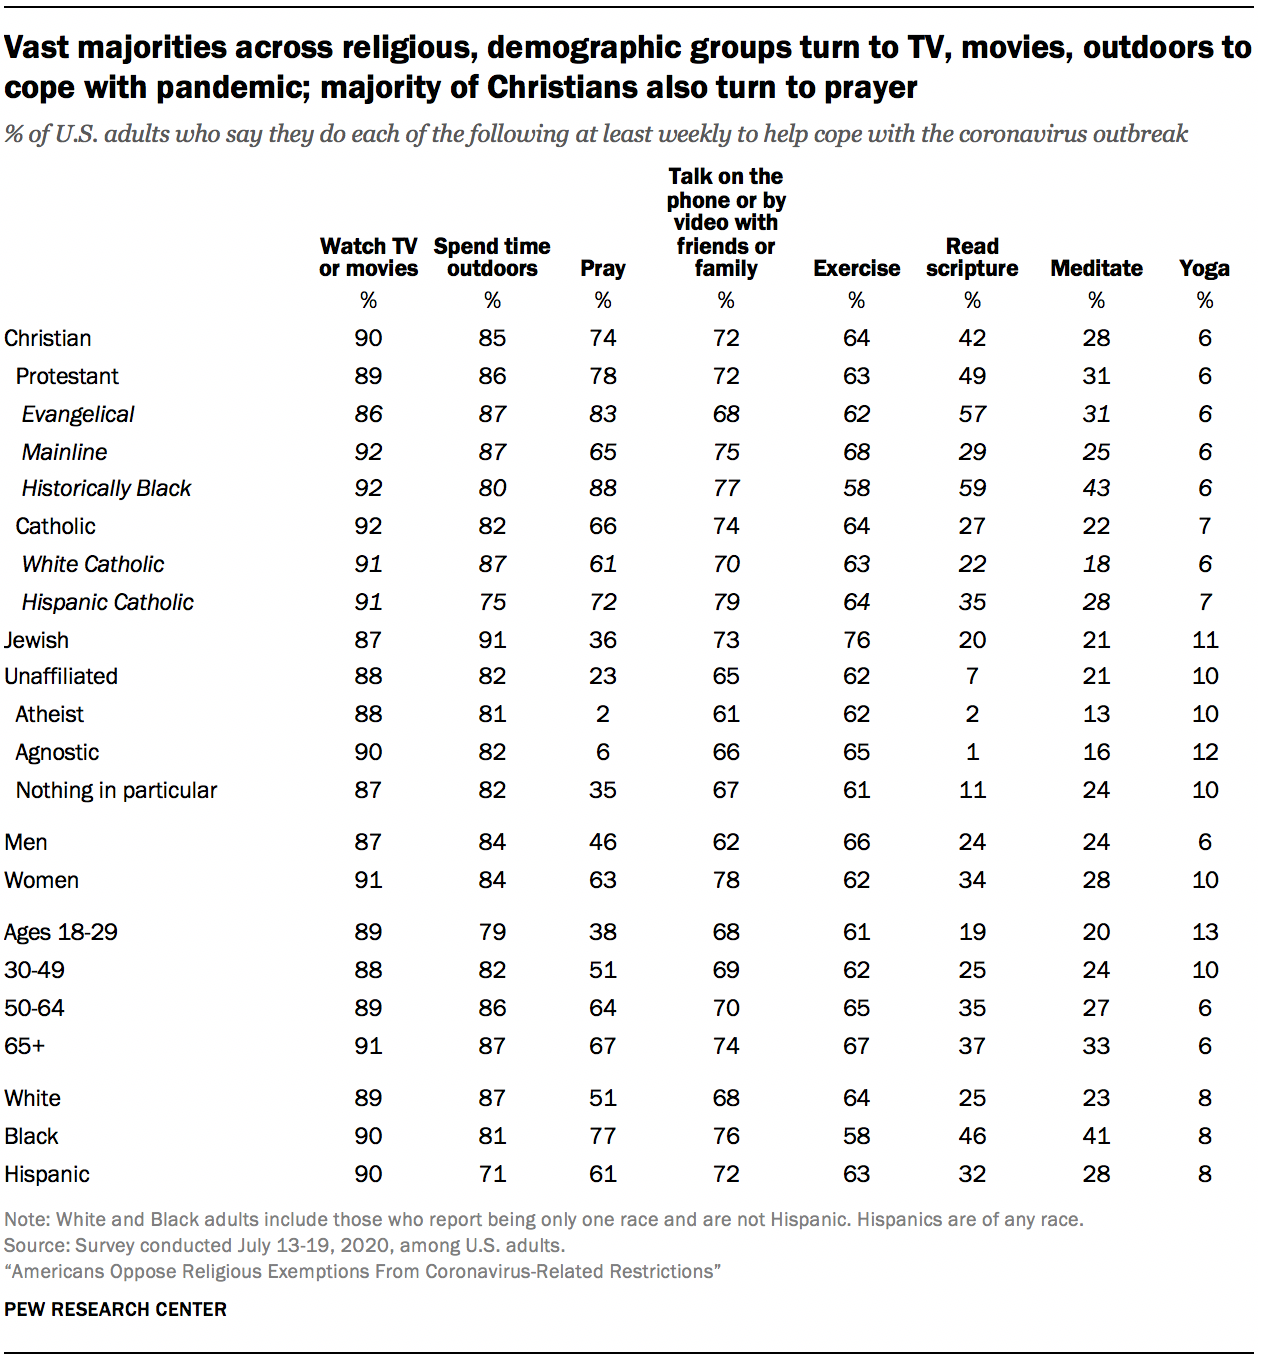 Vast majorities across religious, demographic groups turn to TV, movies, outdoors to cope with pandemic; majority of Christians also turn to prayer